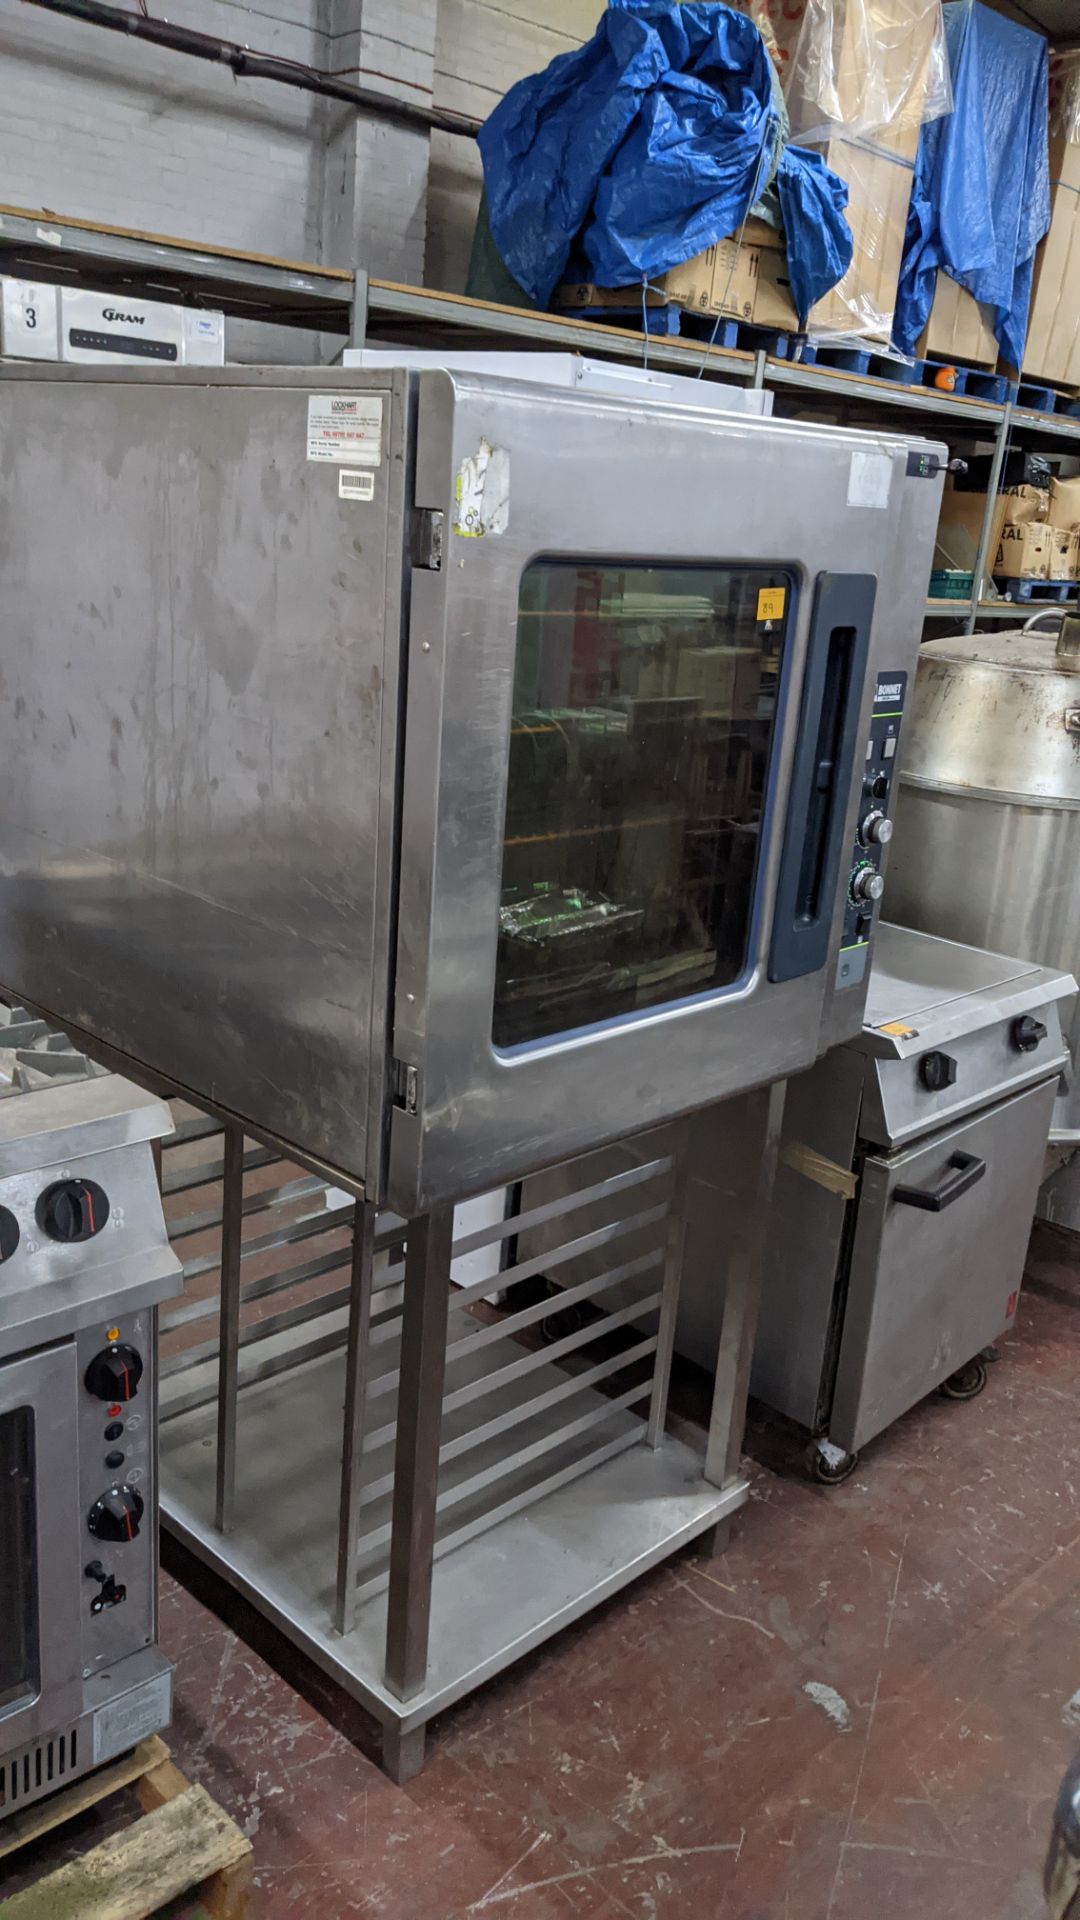 Bonnet Cidelcem Industries oven on dedicated stand - Image 6 of 6